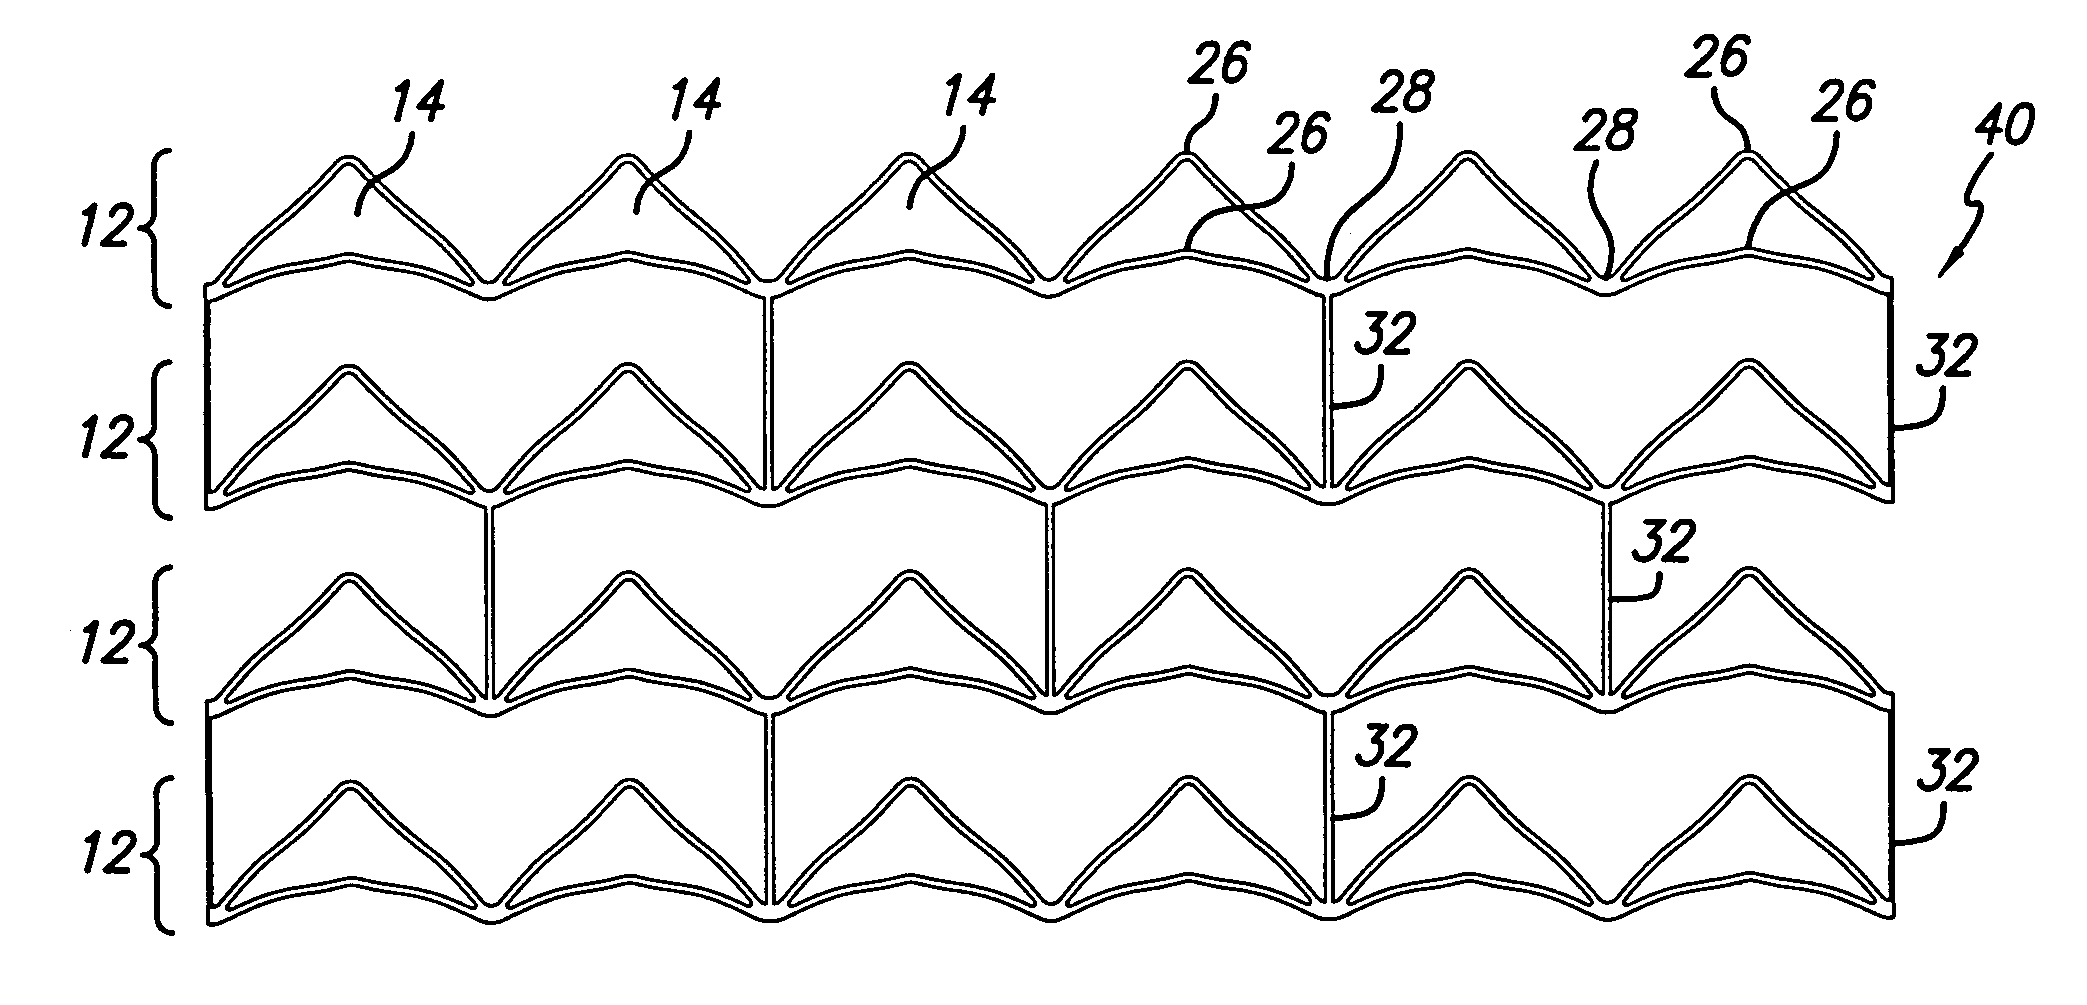 Apparatus and method for decreasing stent gap size